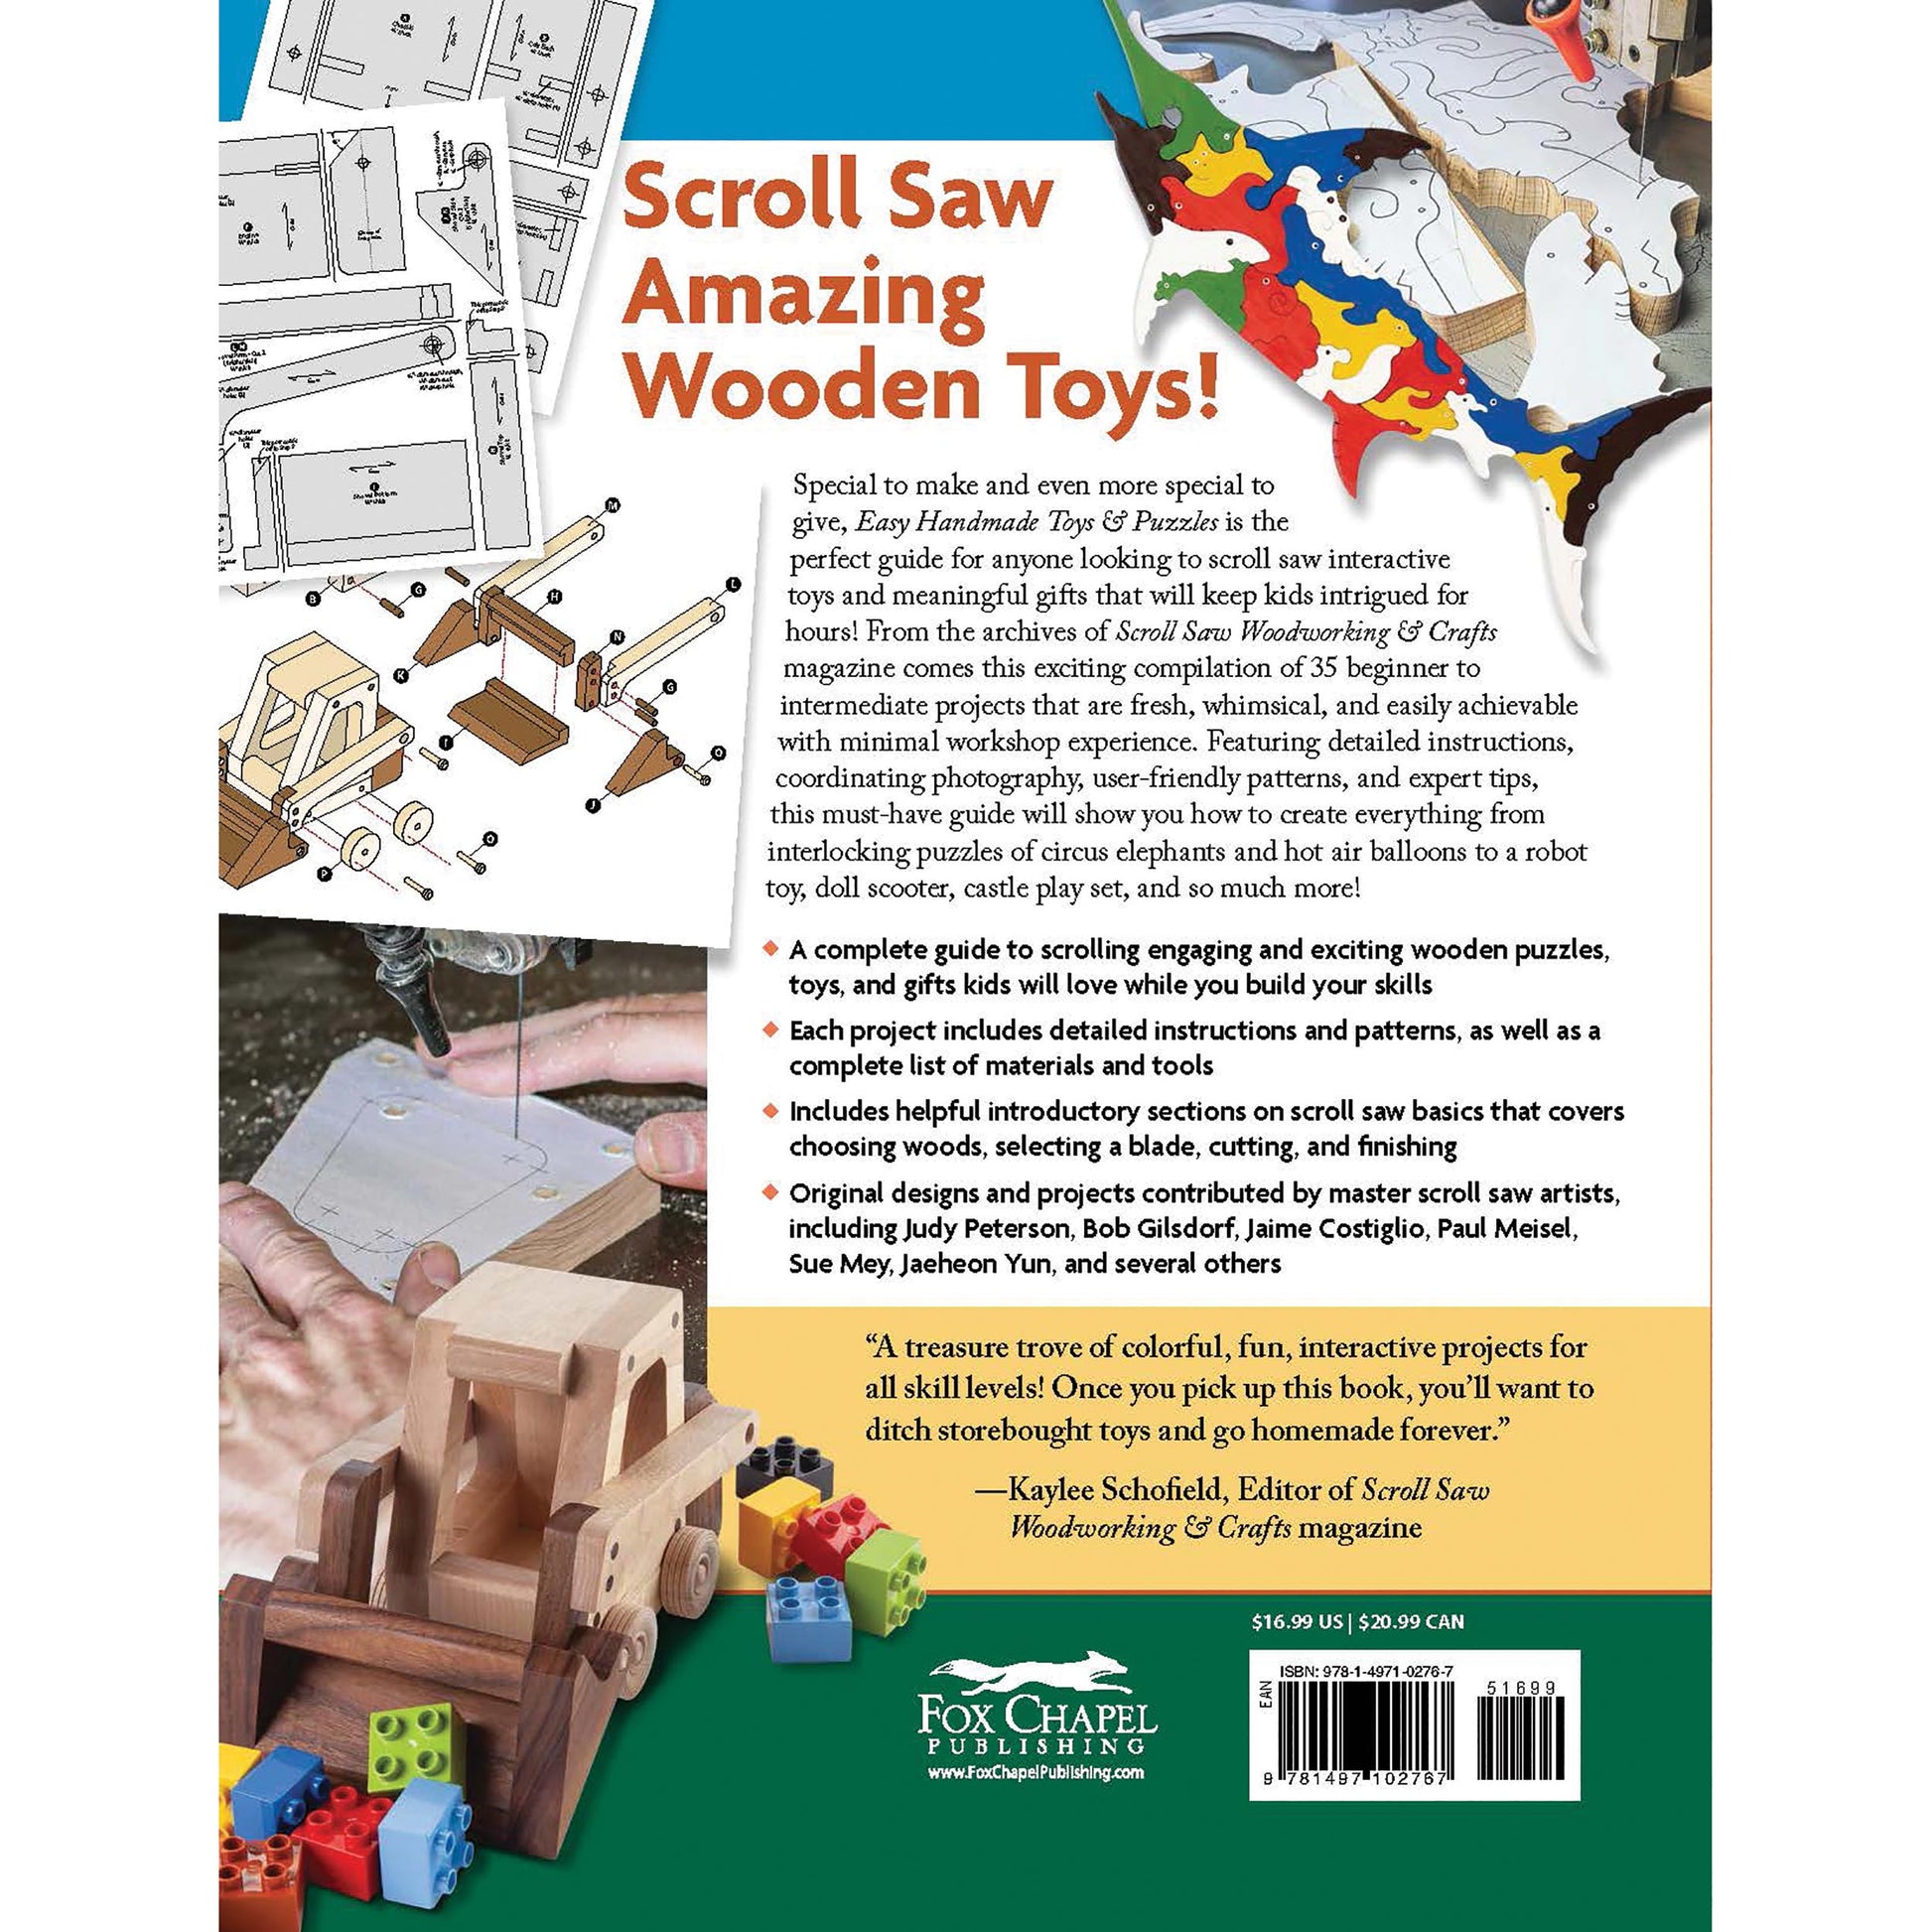 Handmade Toys & Puzzles: 35 Projects & Patterns alt 5